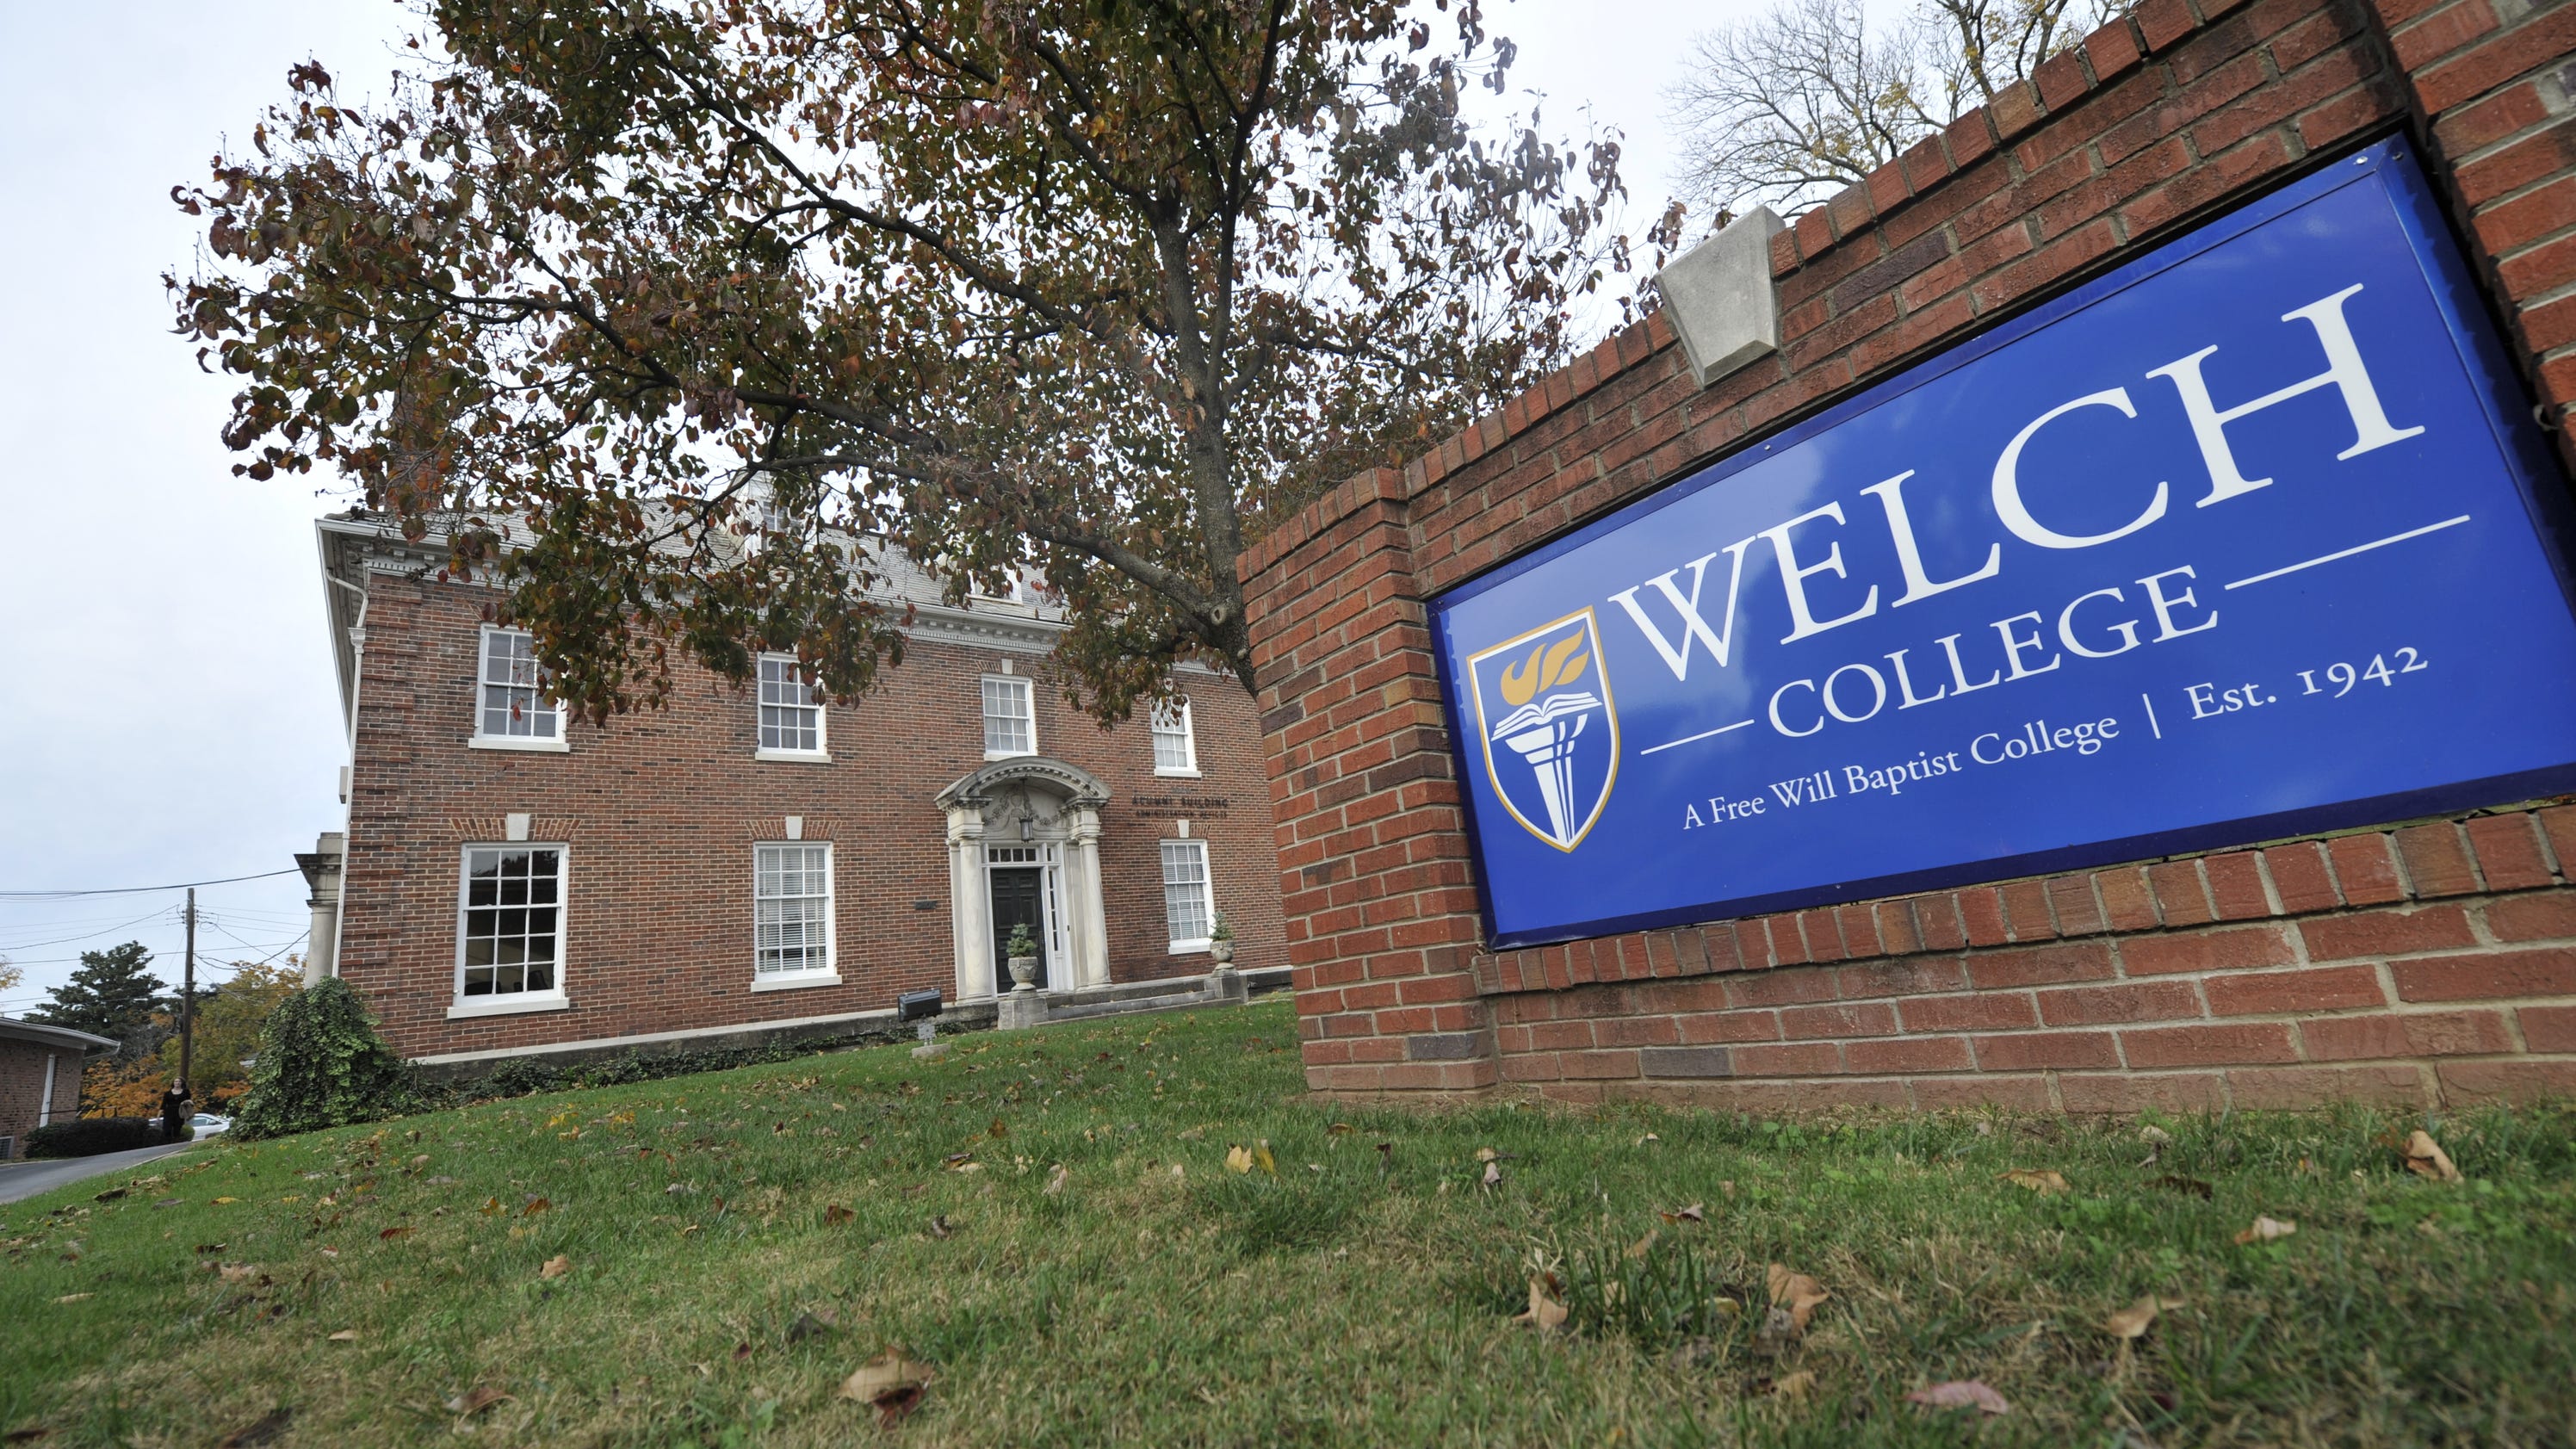 Million Dollar Homes Condos Planned For Welch College Site On